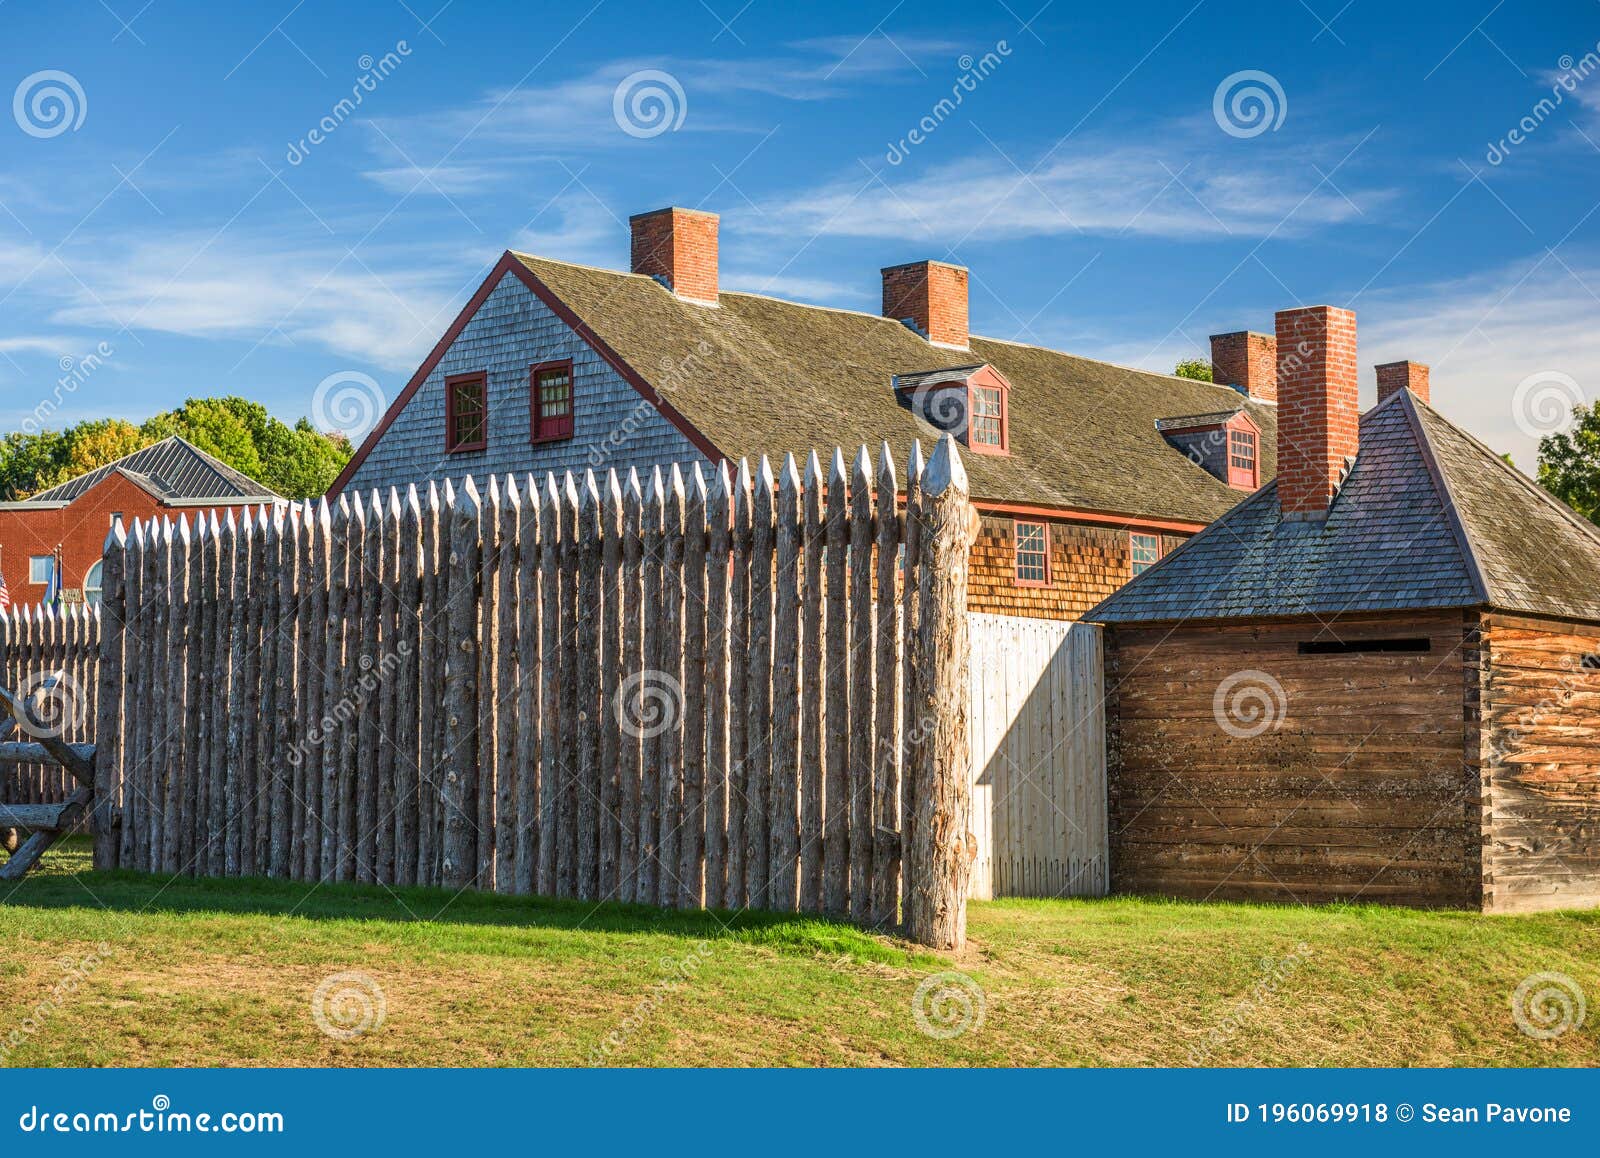 augusta, maine, usa at historic fort western